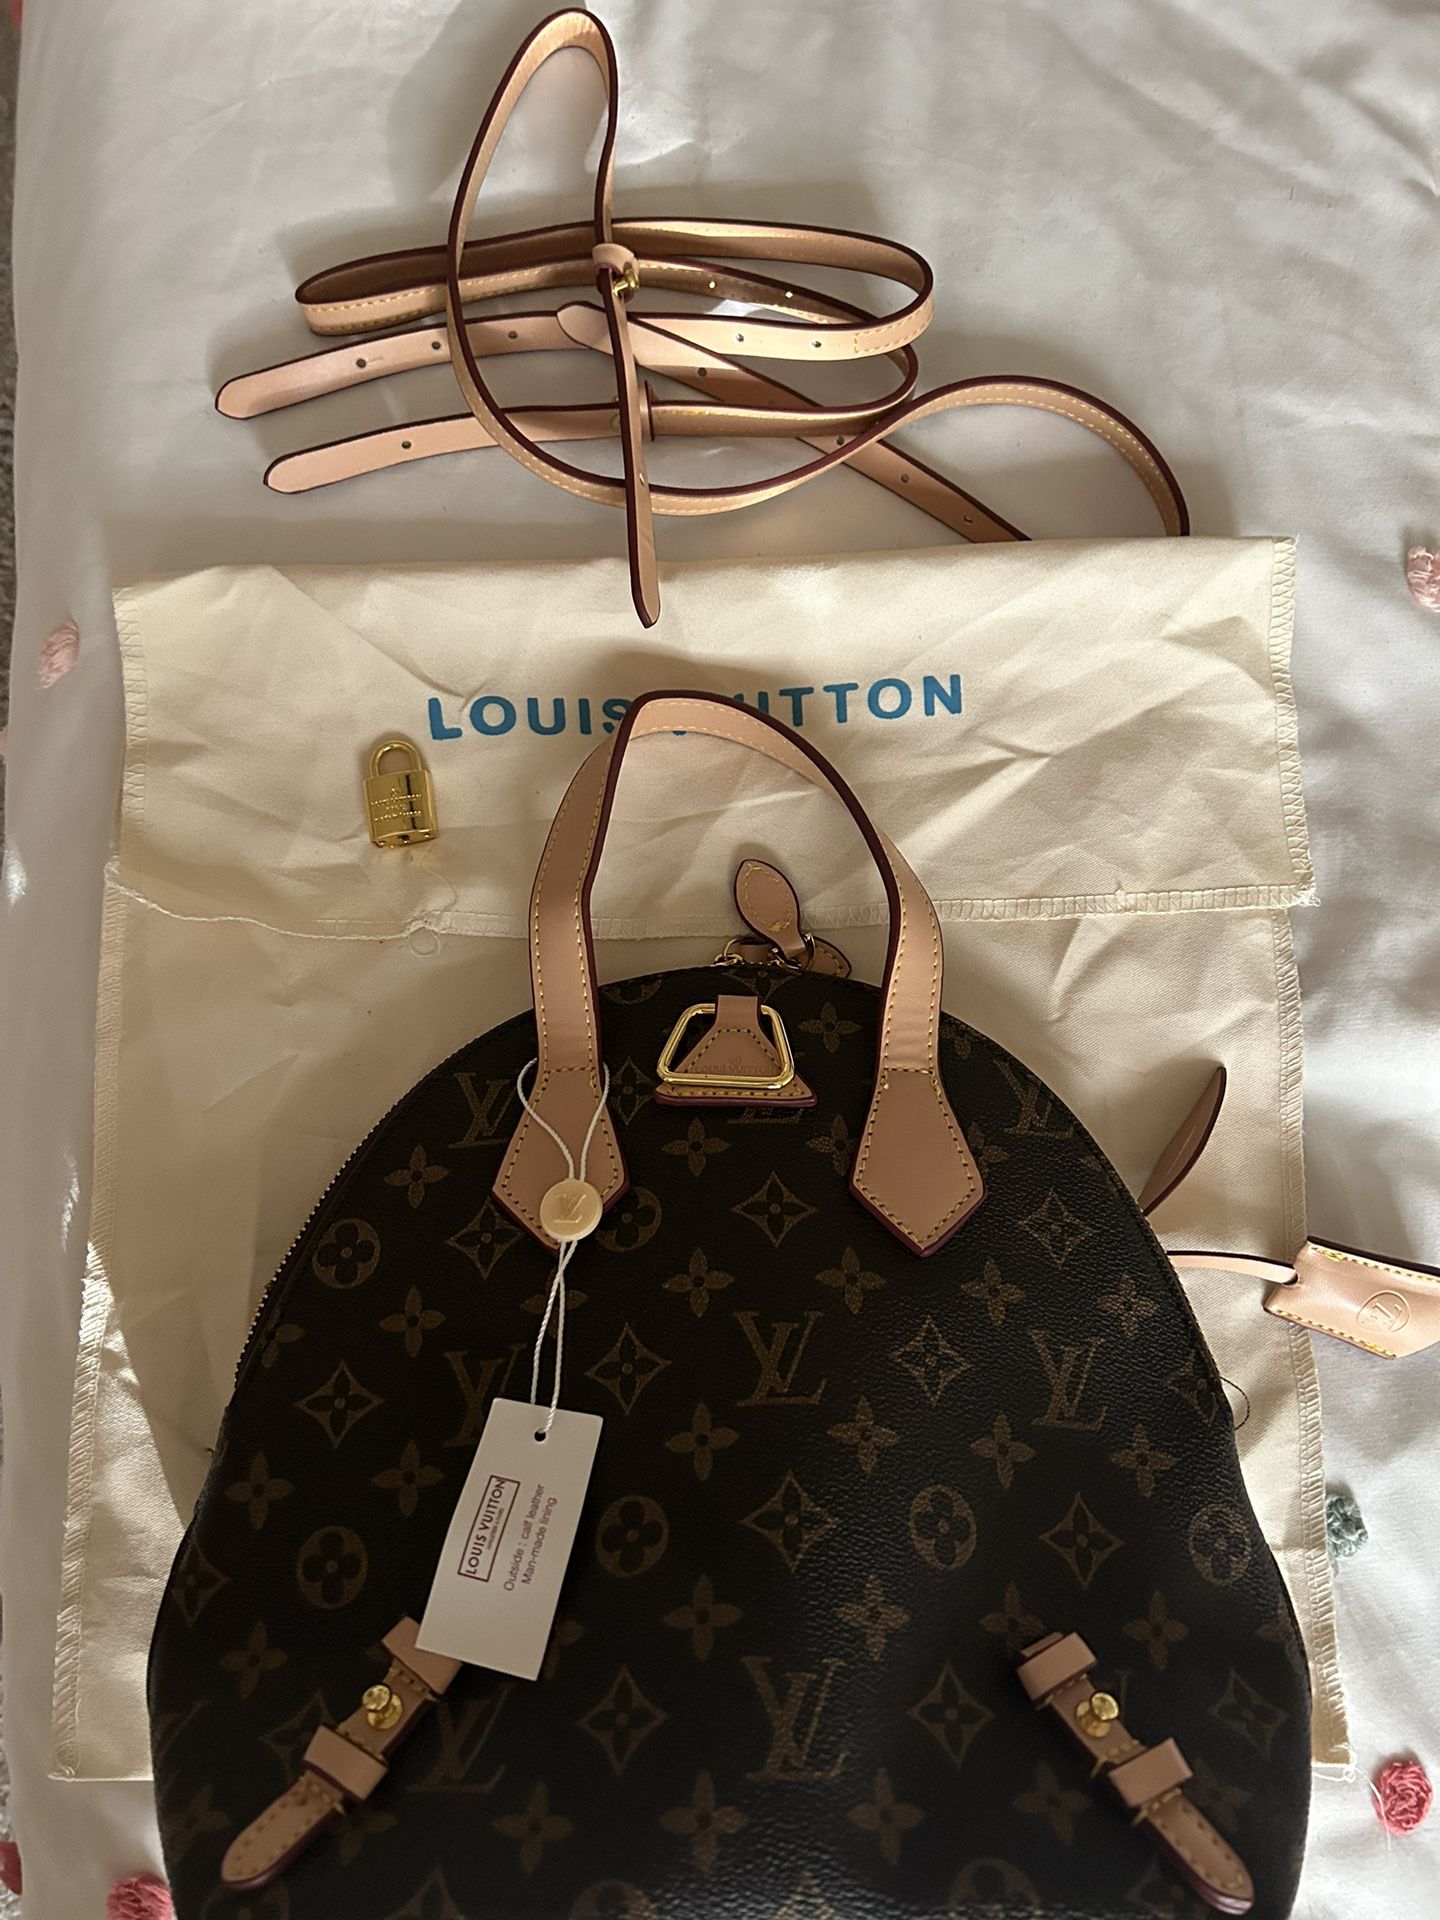 Authentic Louis Vuitton Backpack for Sale Lake TX - OfferUp